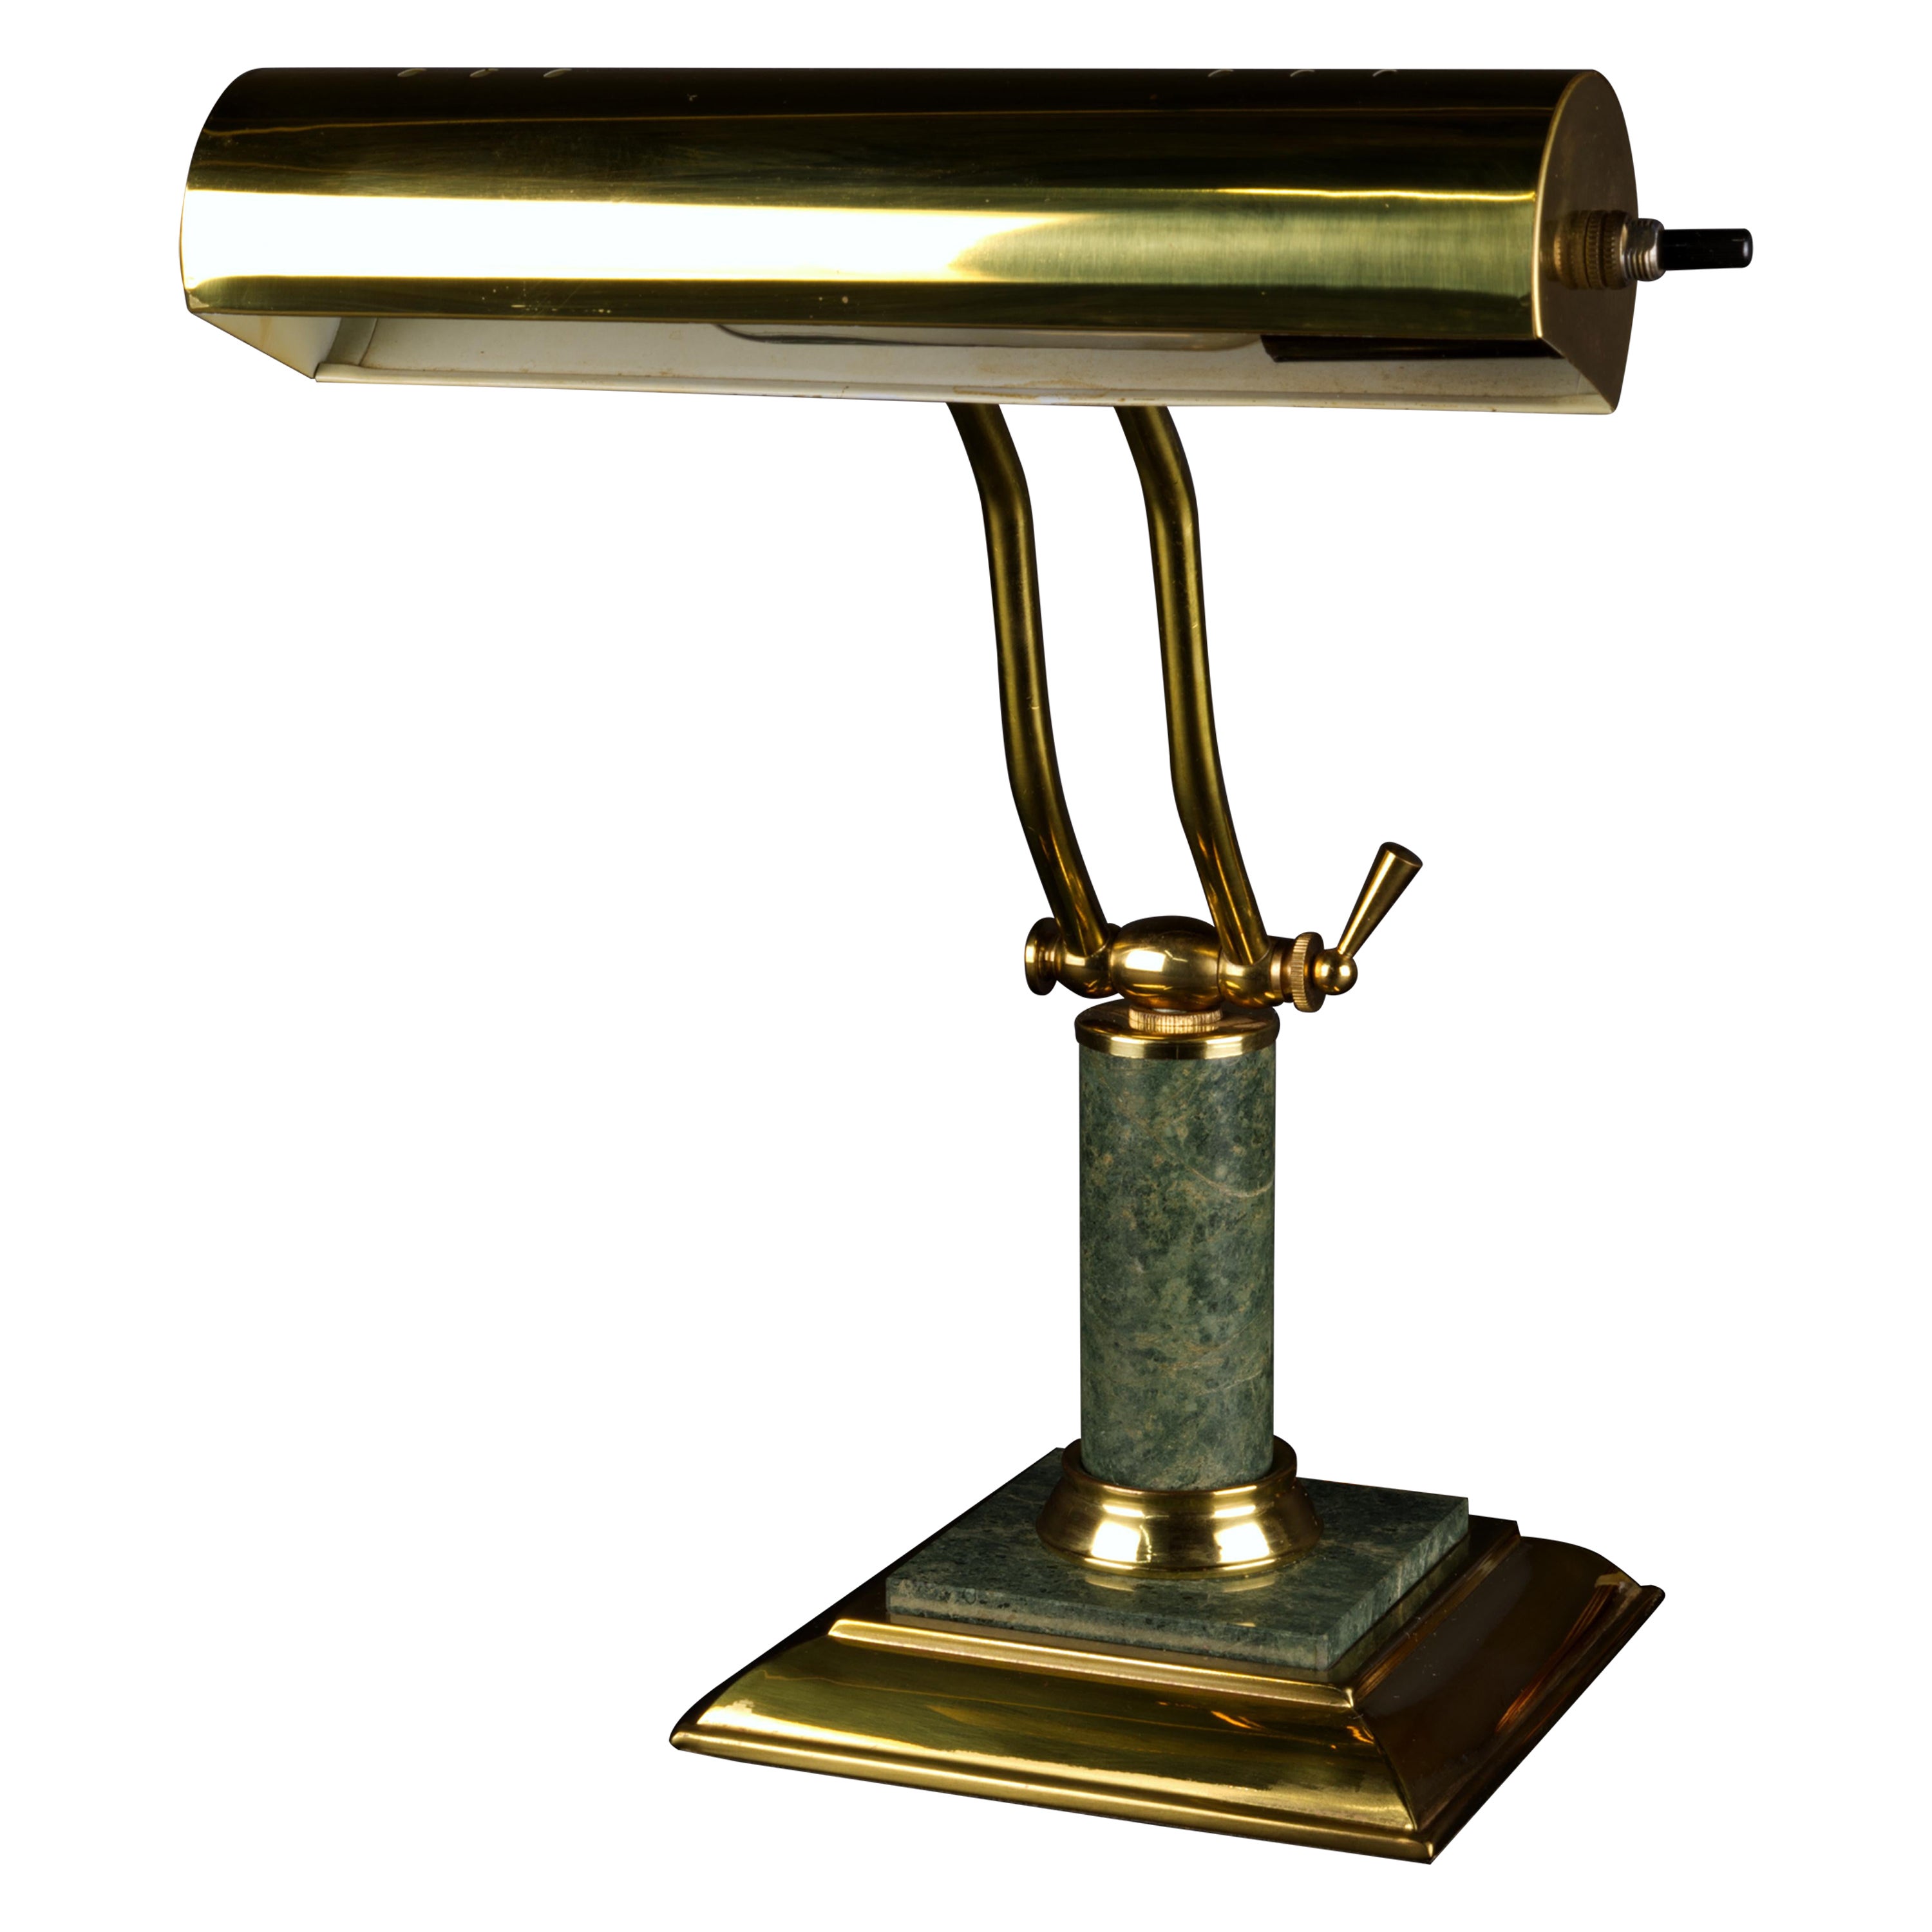 Why do banker’s lamps have green shades?